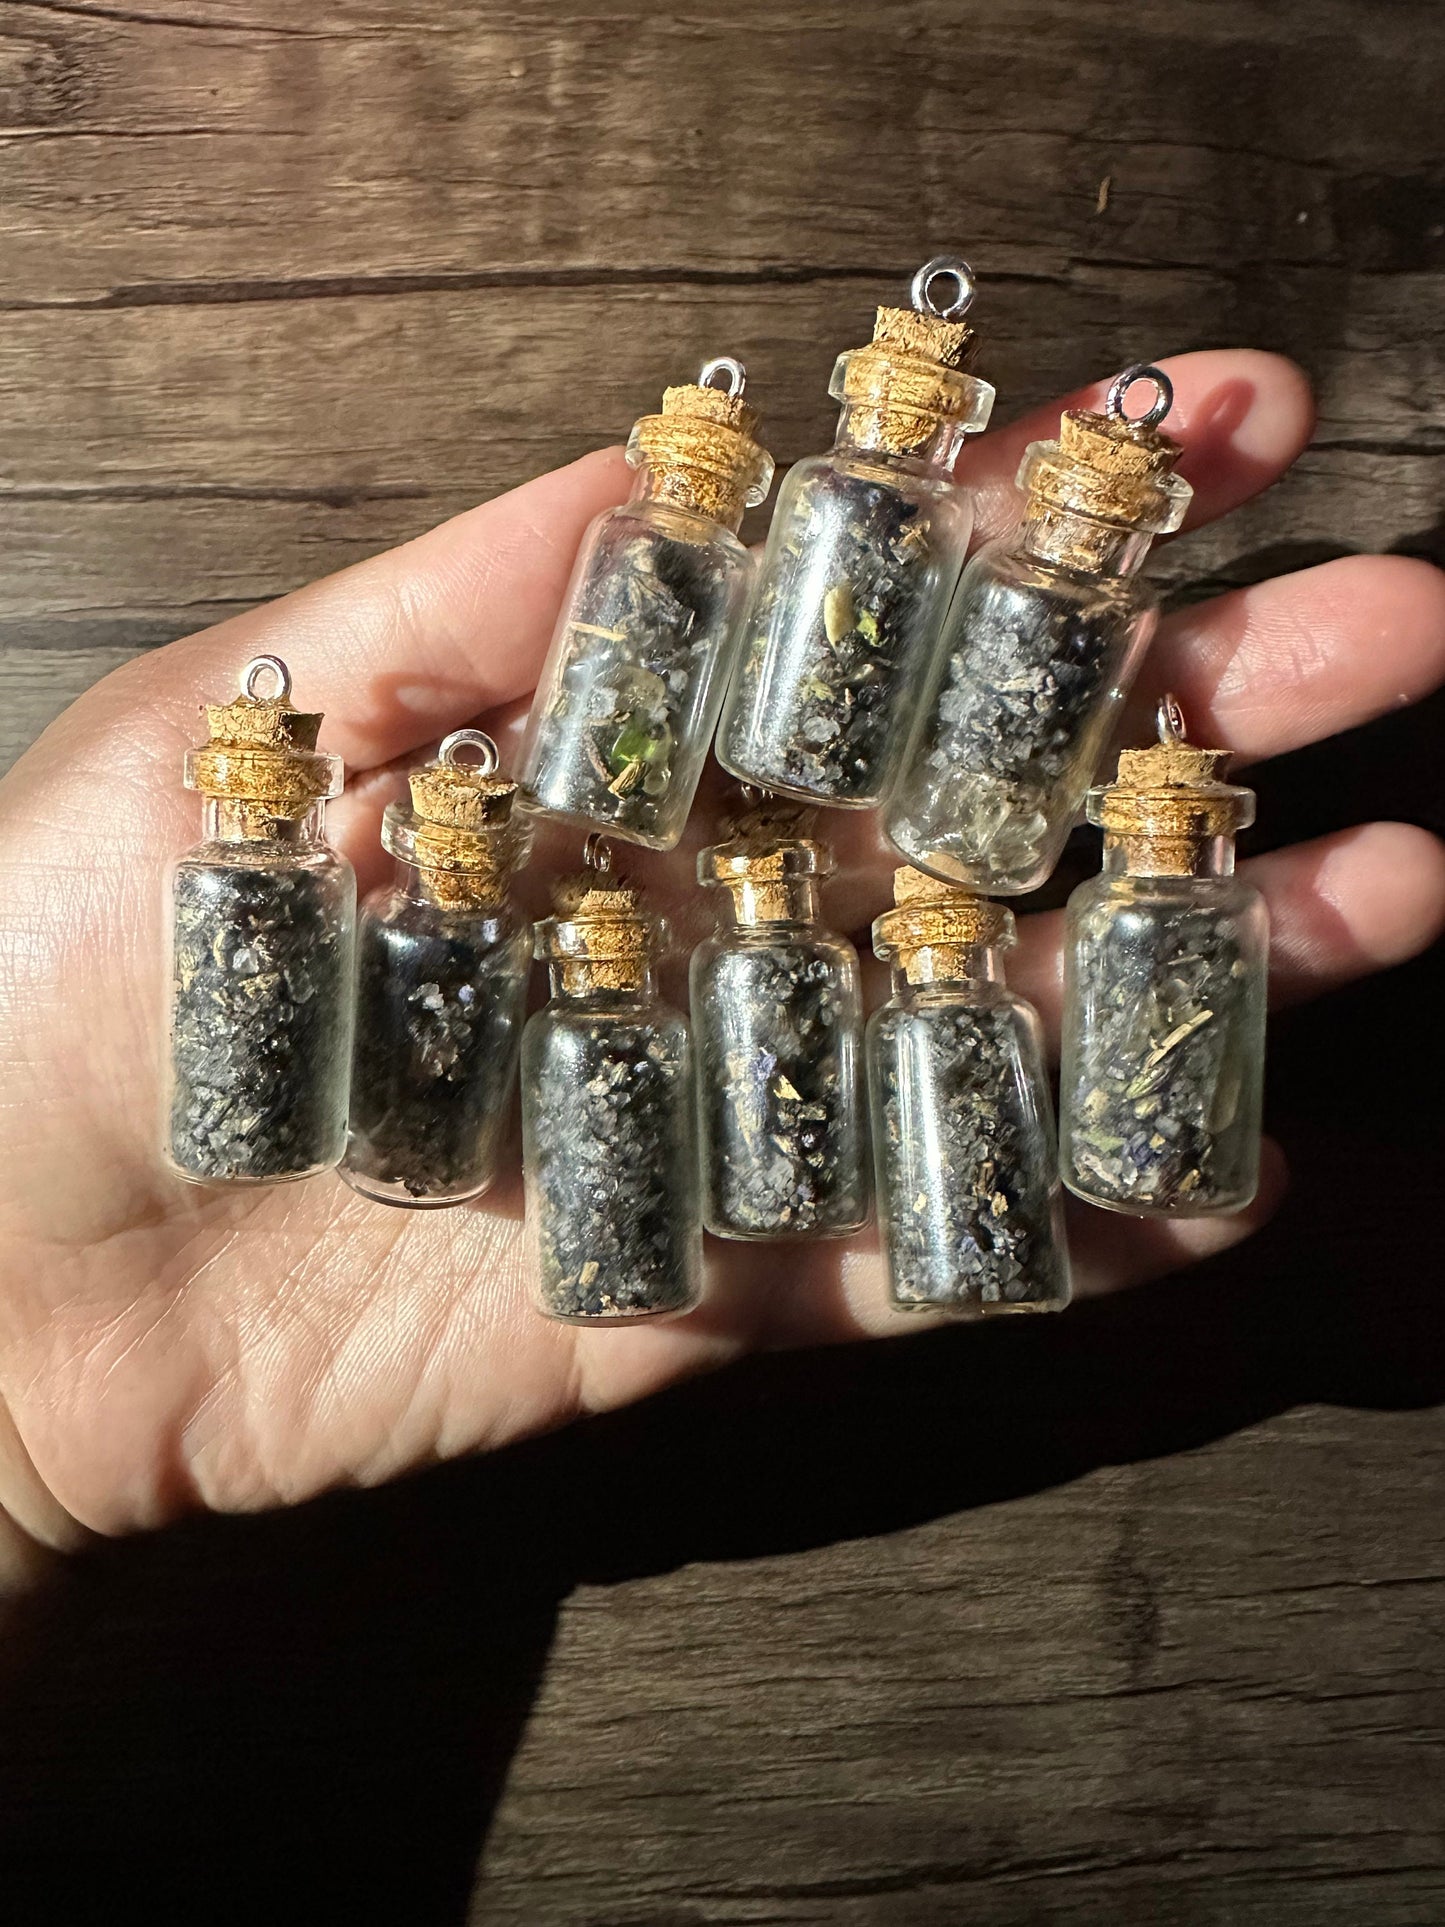 Witches Black Salt Protection Spell Jar Necklace